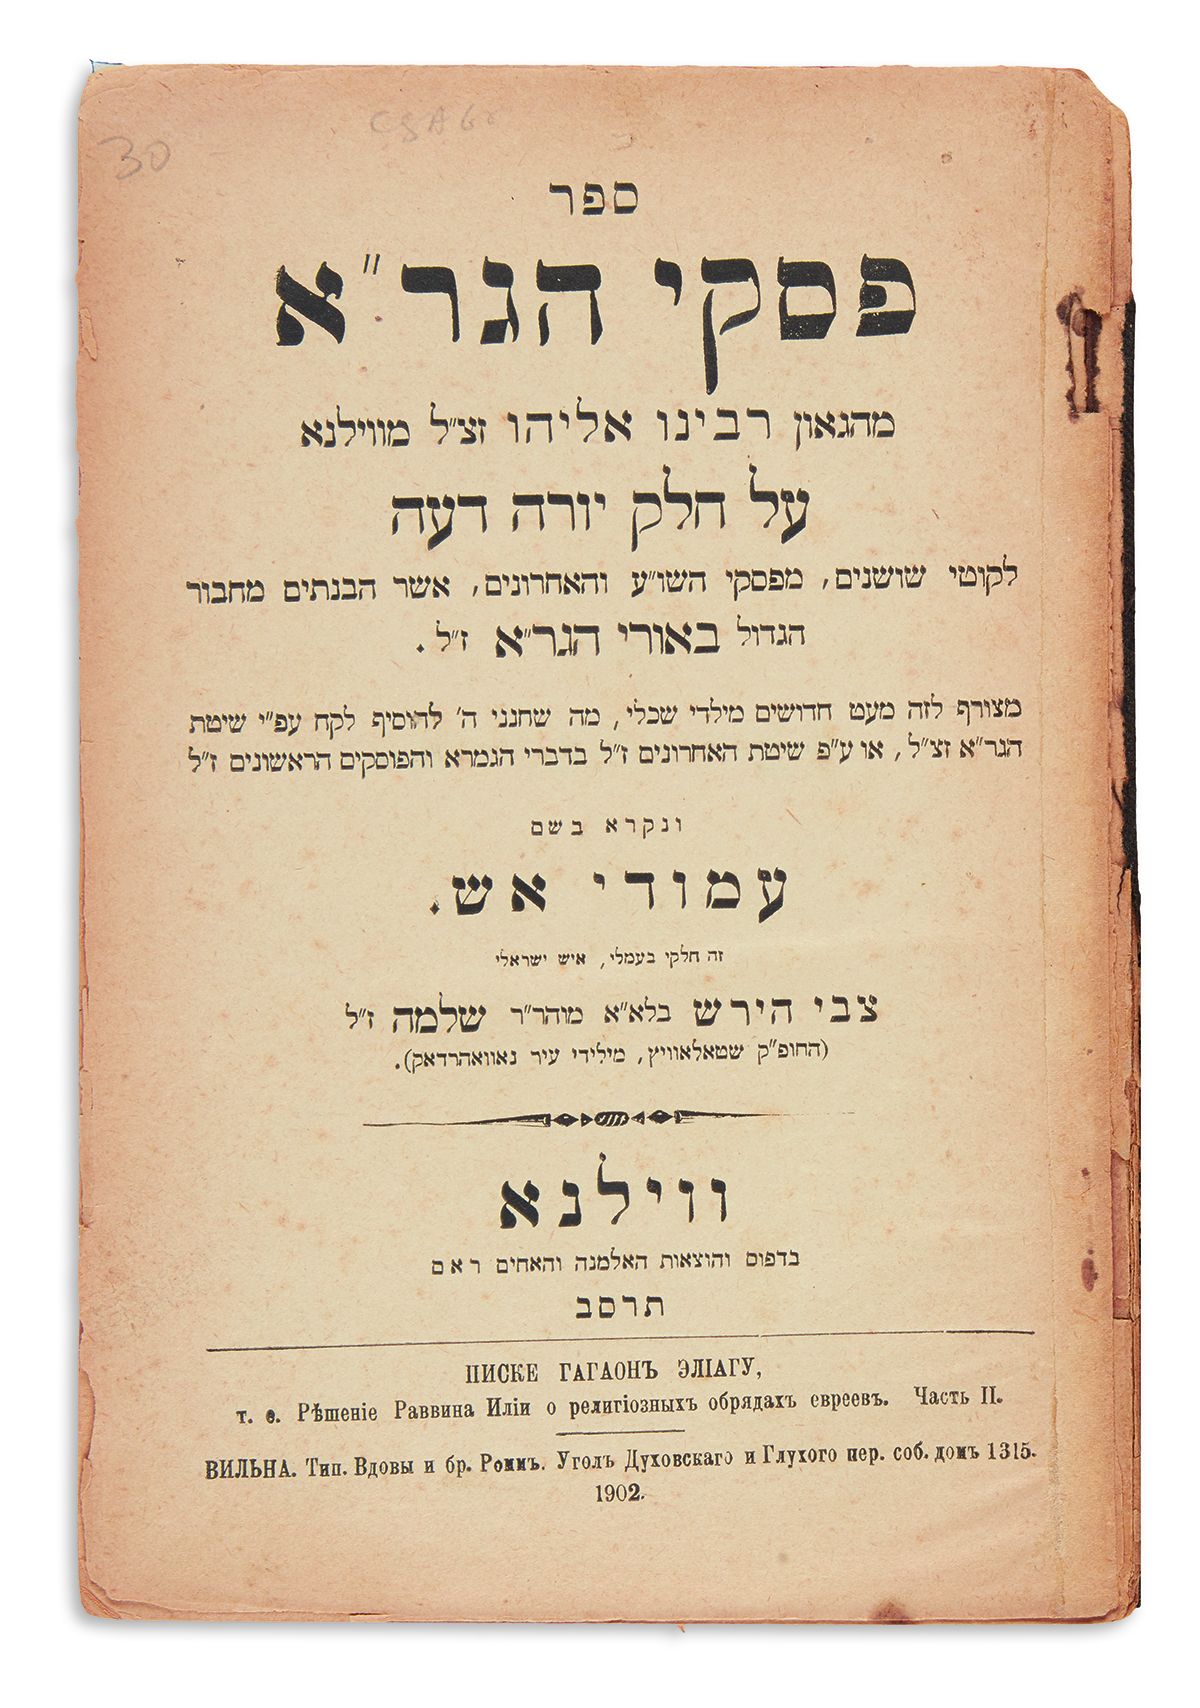 Piskei HaGr’a Yoreh Deah [the rulings of the Vilna Gaon pertaining to Shulchan Aruch Yoreh De’ah as extrapolated and understood from his works]. With commentary Amudei Eish by Tzvi Hirsch b. Shlomo Lempert.